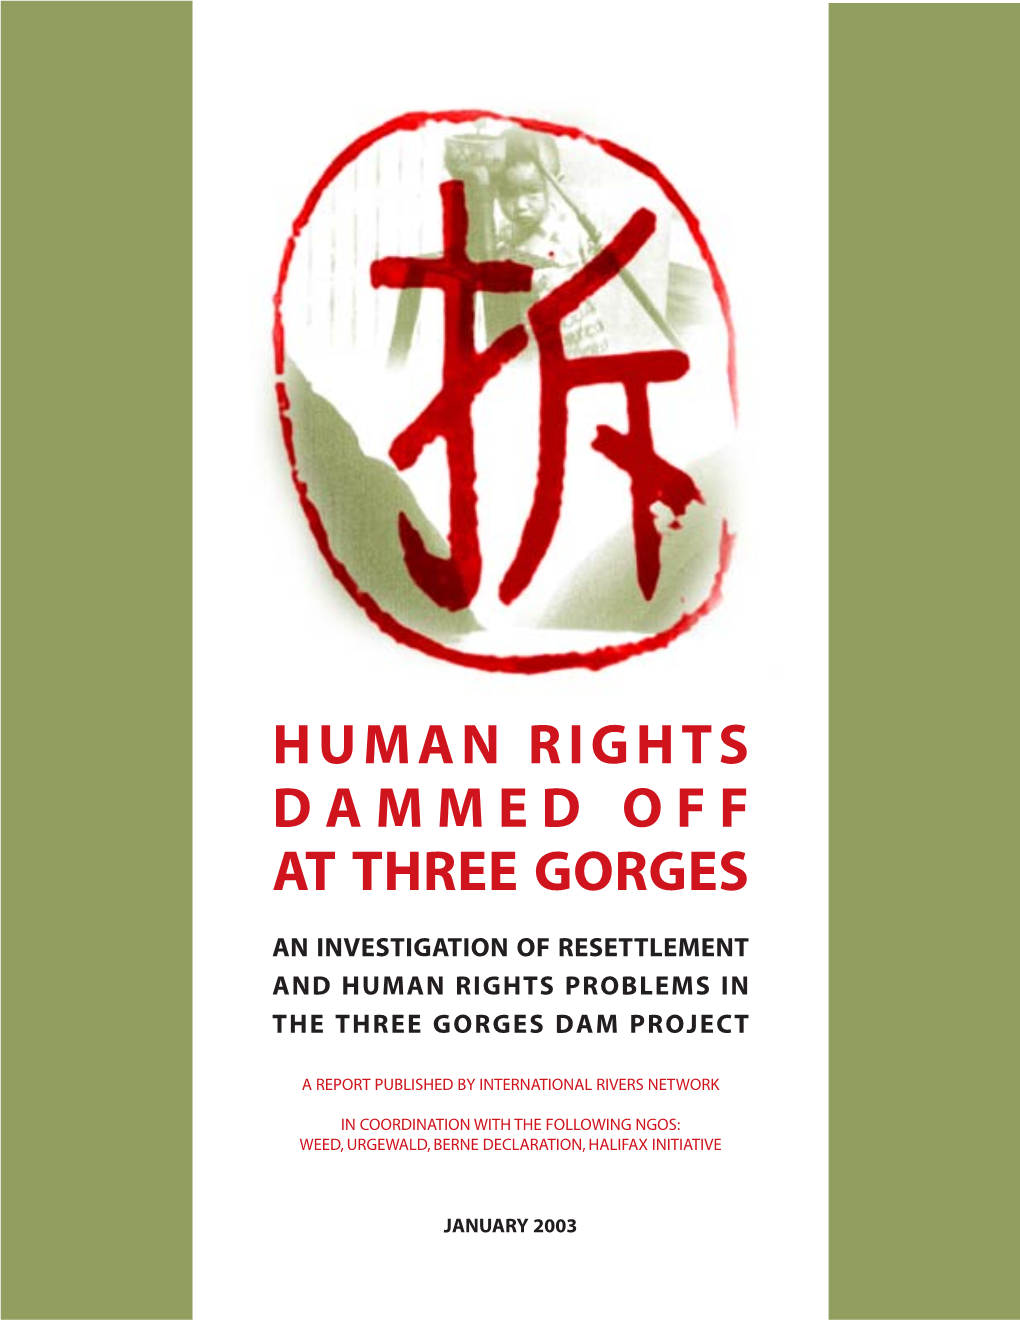 Human Rights Dammed Off at Three Gorges, an Investigation of Resettlement and Human Rights Problems In